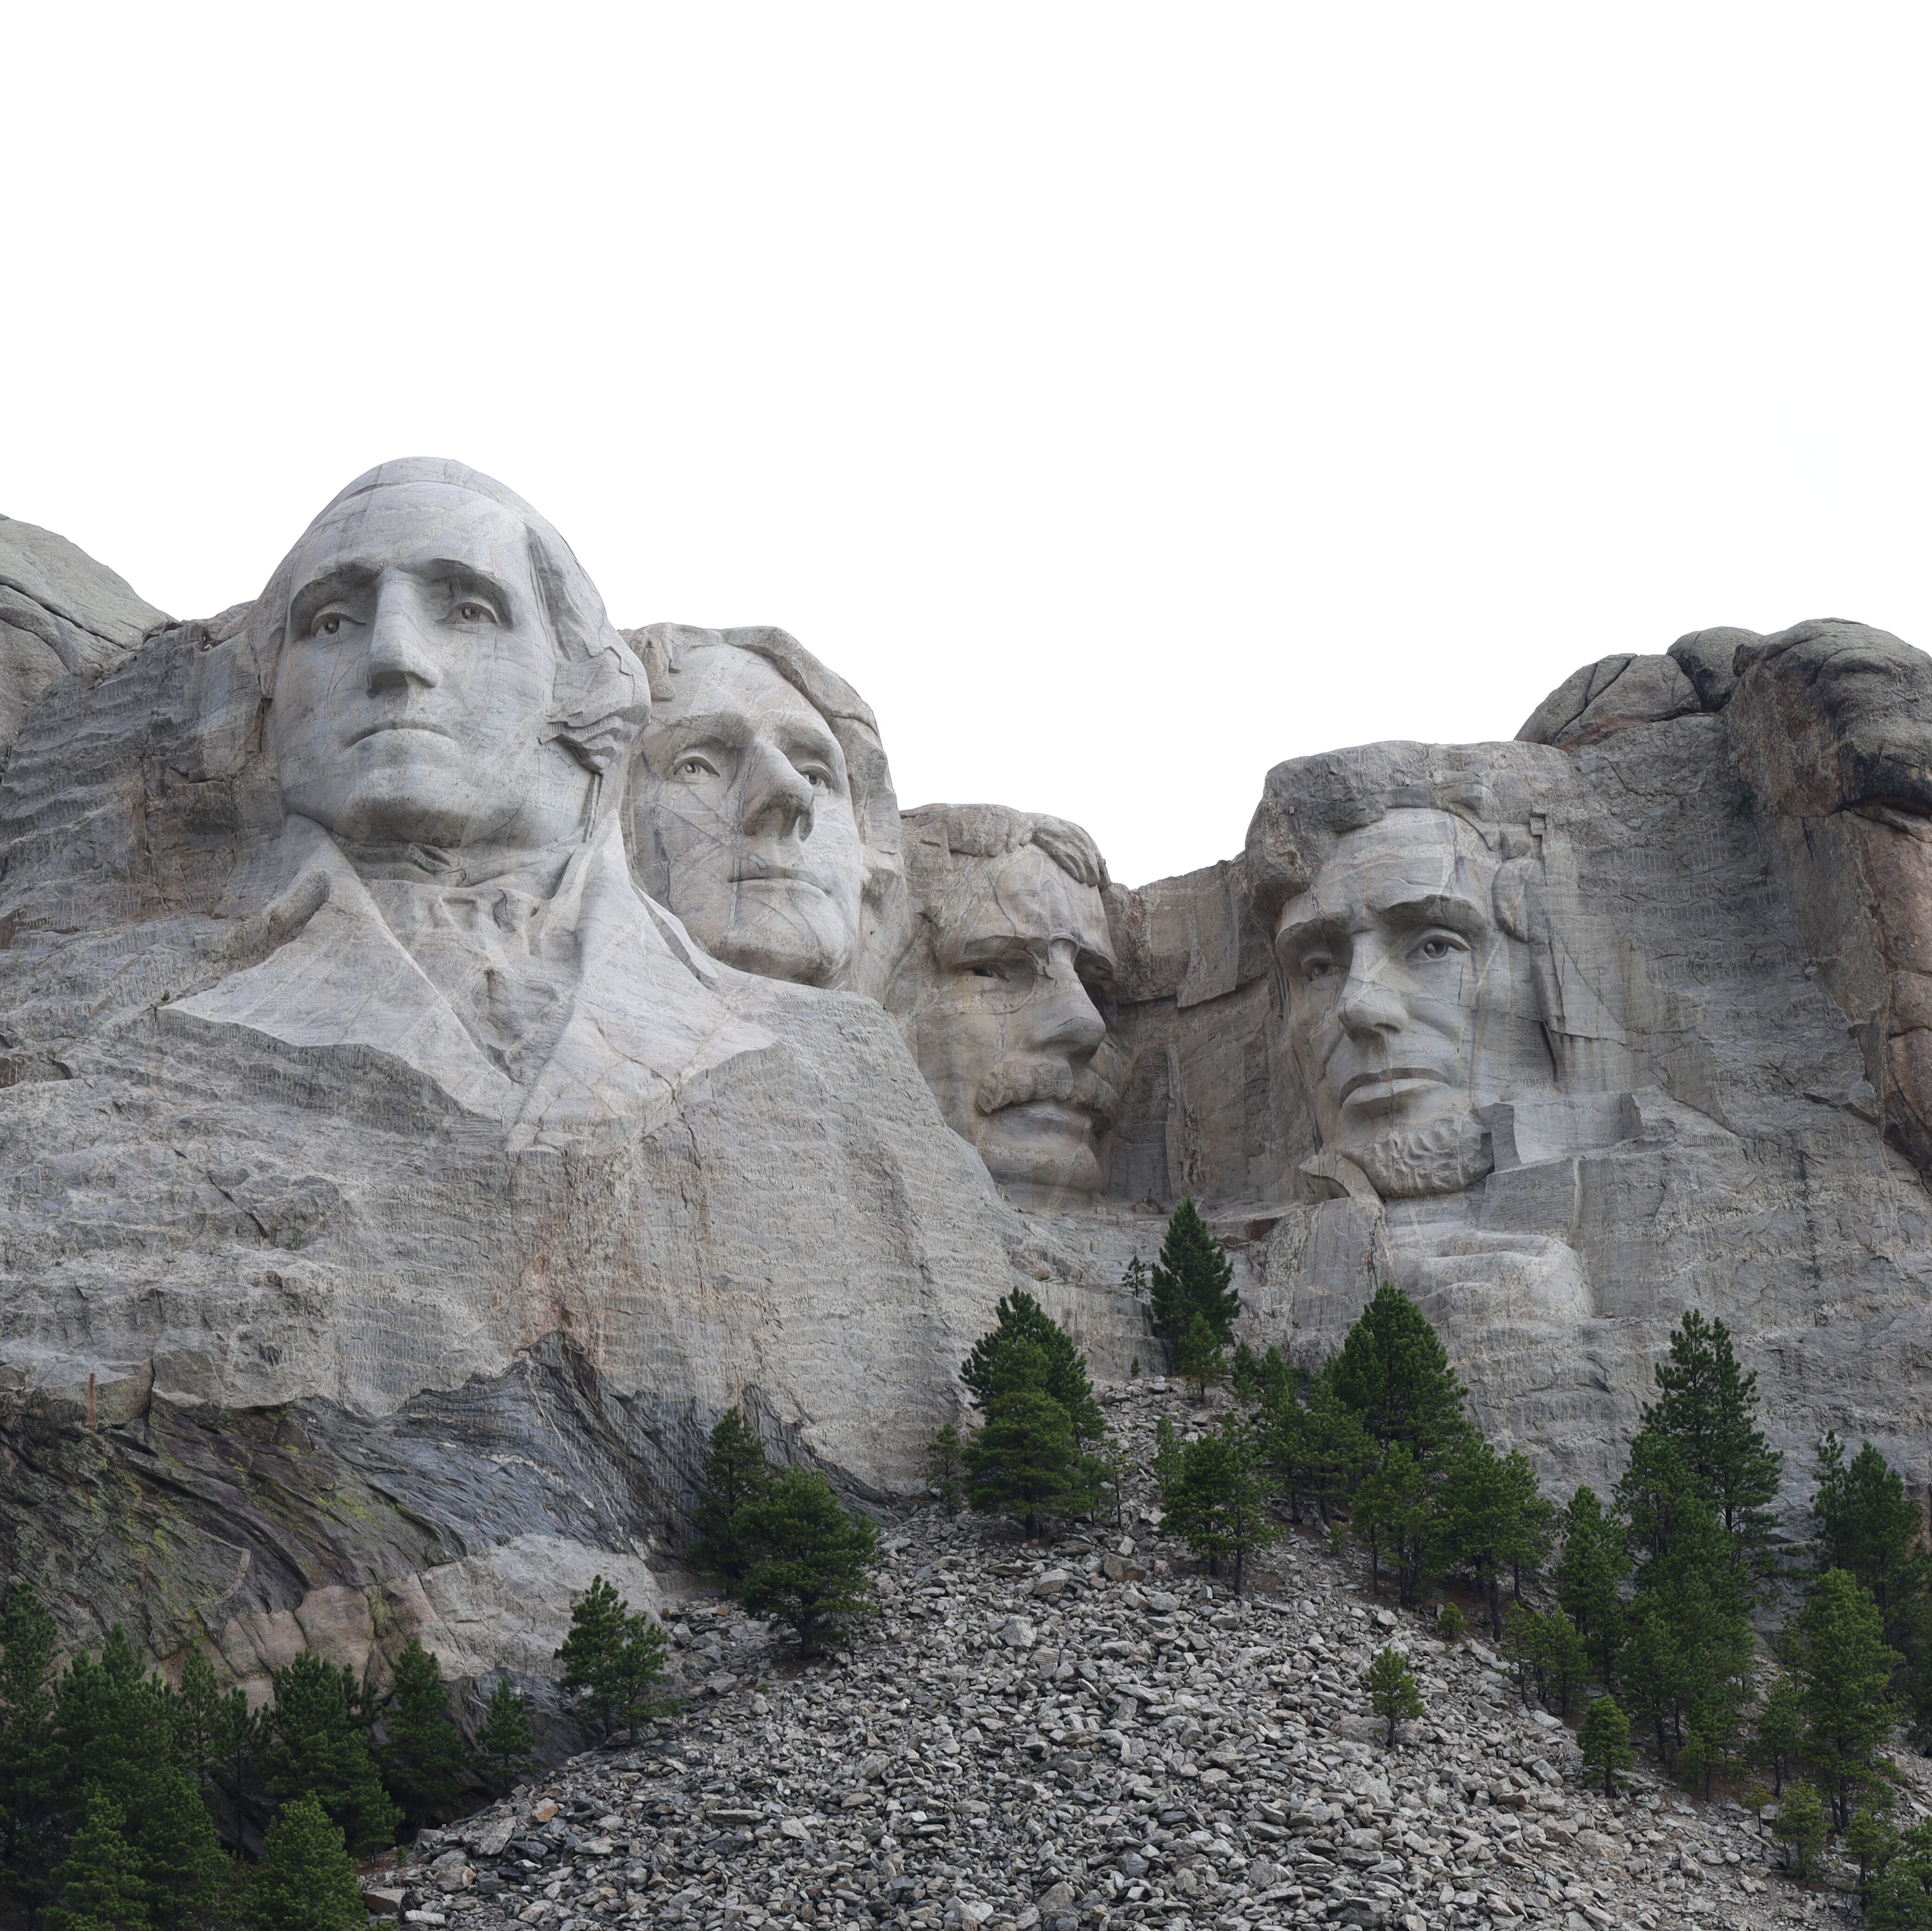 Visiting Mt. Rushmore: Stunning Sculpture in America’s Heartland